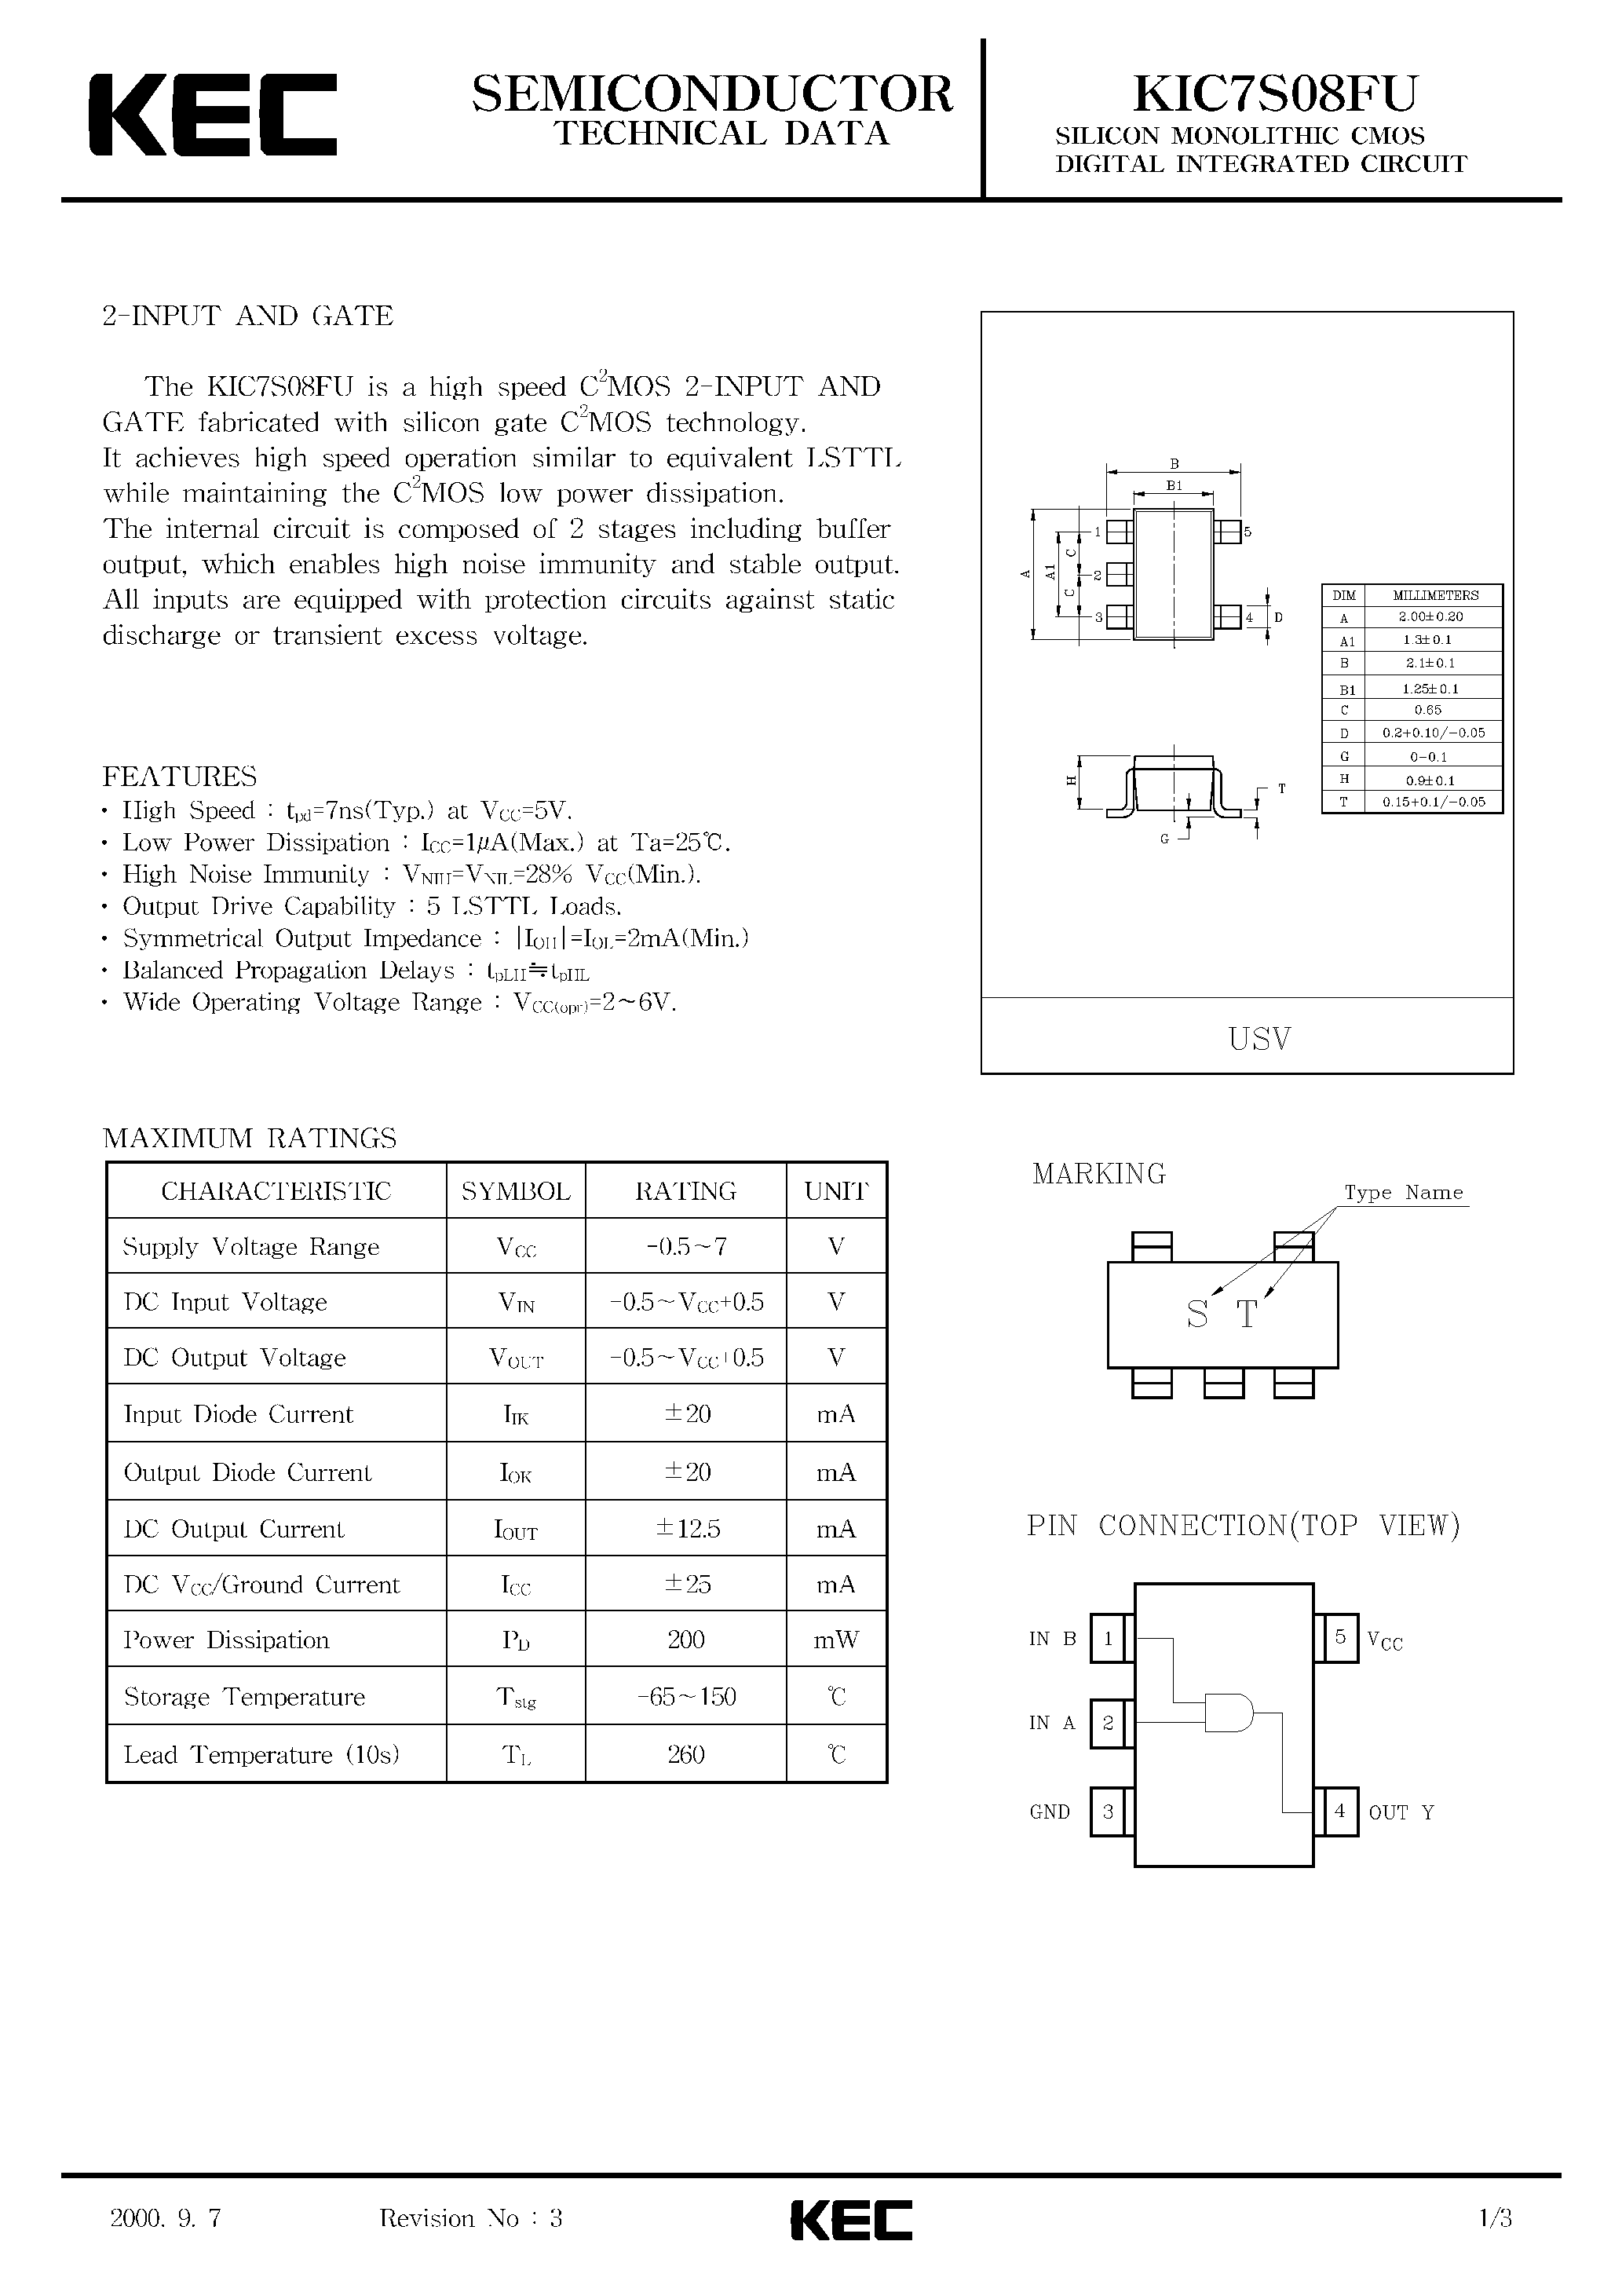 Datasheet KIC7S08FU - SILICON MONOLITHIC CMOS DIGITAL INTEGRATED CIRCUIT(2-INPUT AND GATE) page 1